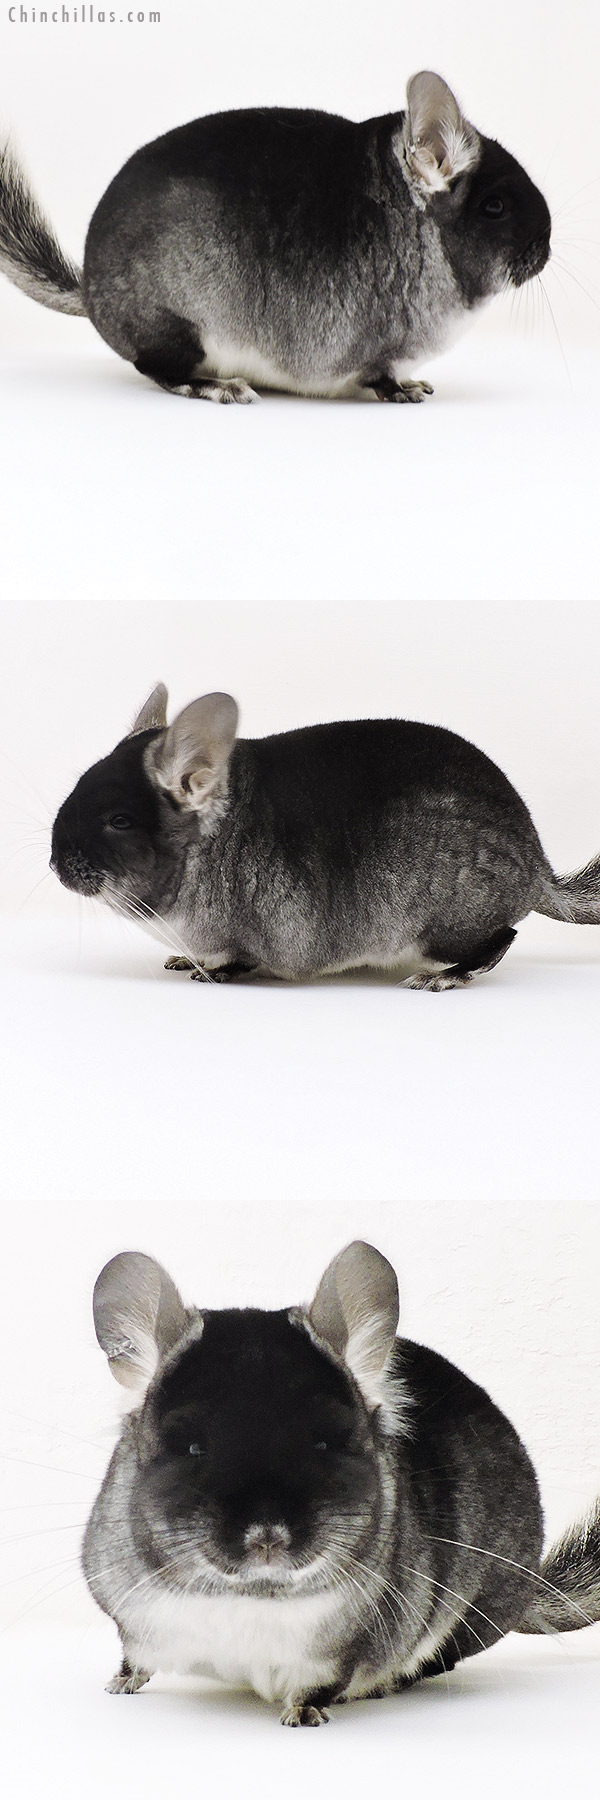 Chinchilla or related item offered for sale or export on Chinchillas.com - 17155 Black Velvet (  Royal Persian Angora & Ebony Carrier ) Female Chinchilla